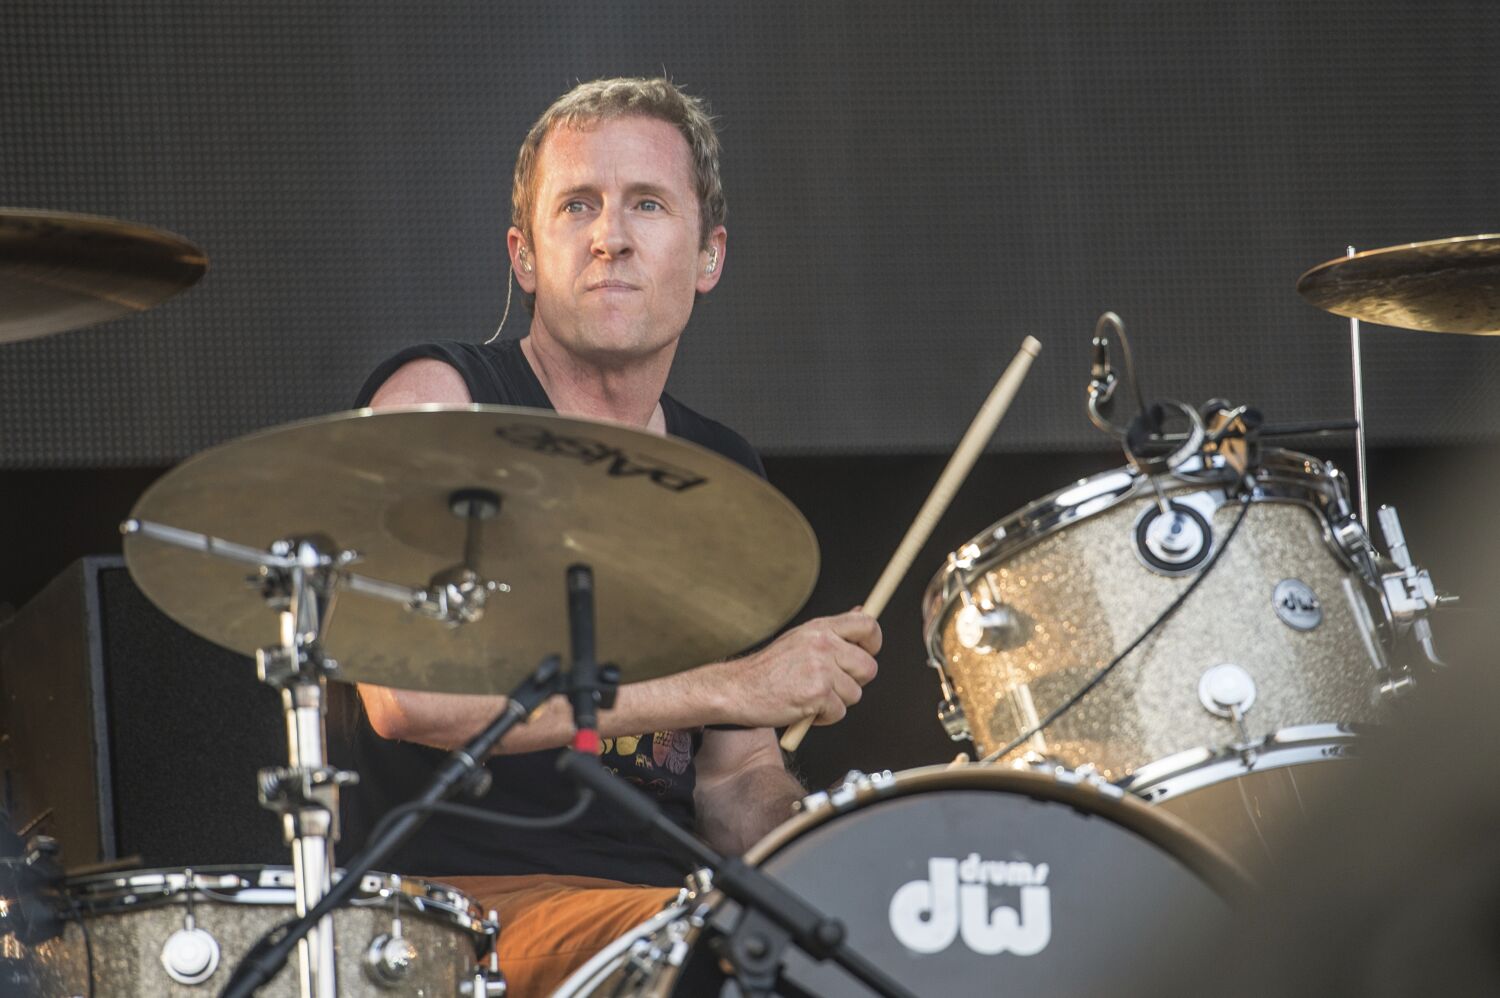 Foo Fighters introduce Josh Freese as new drummer for upcoming tour